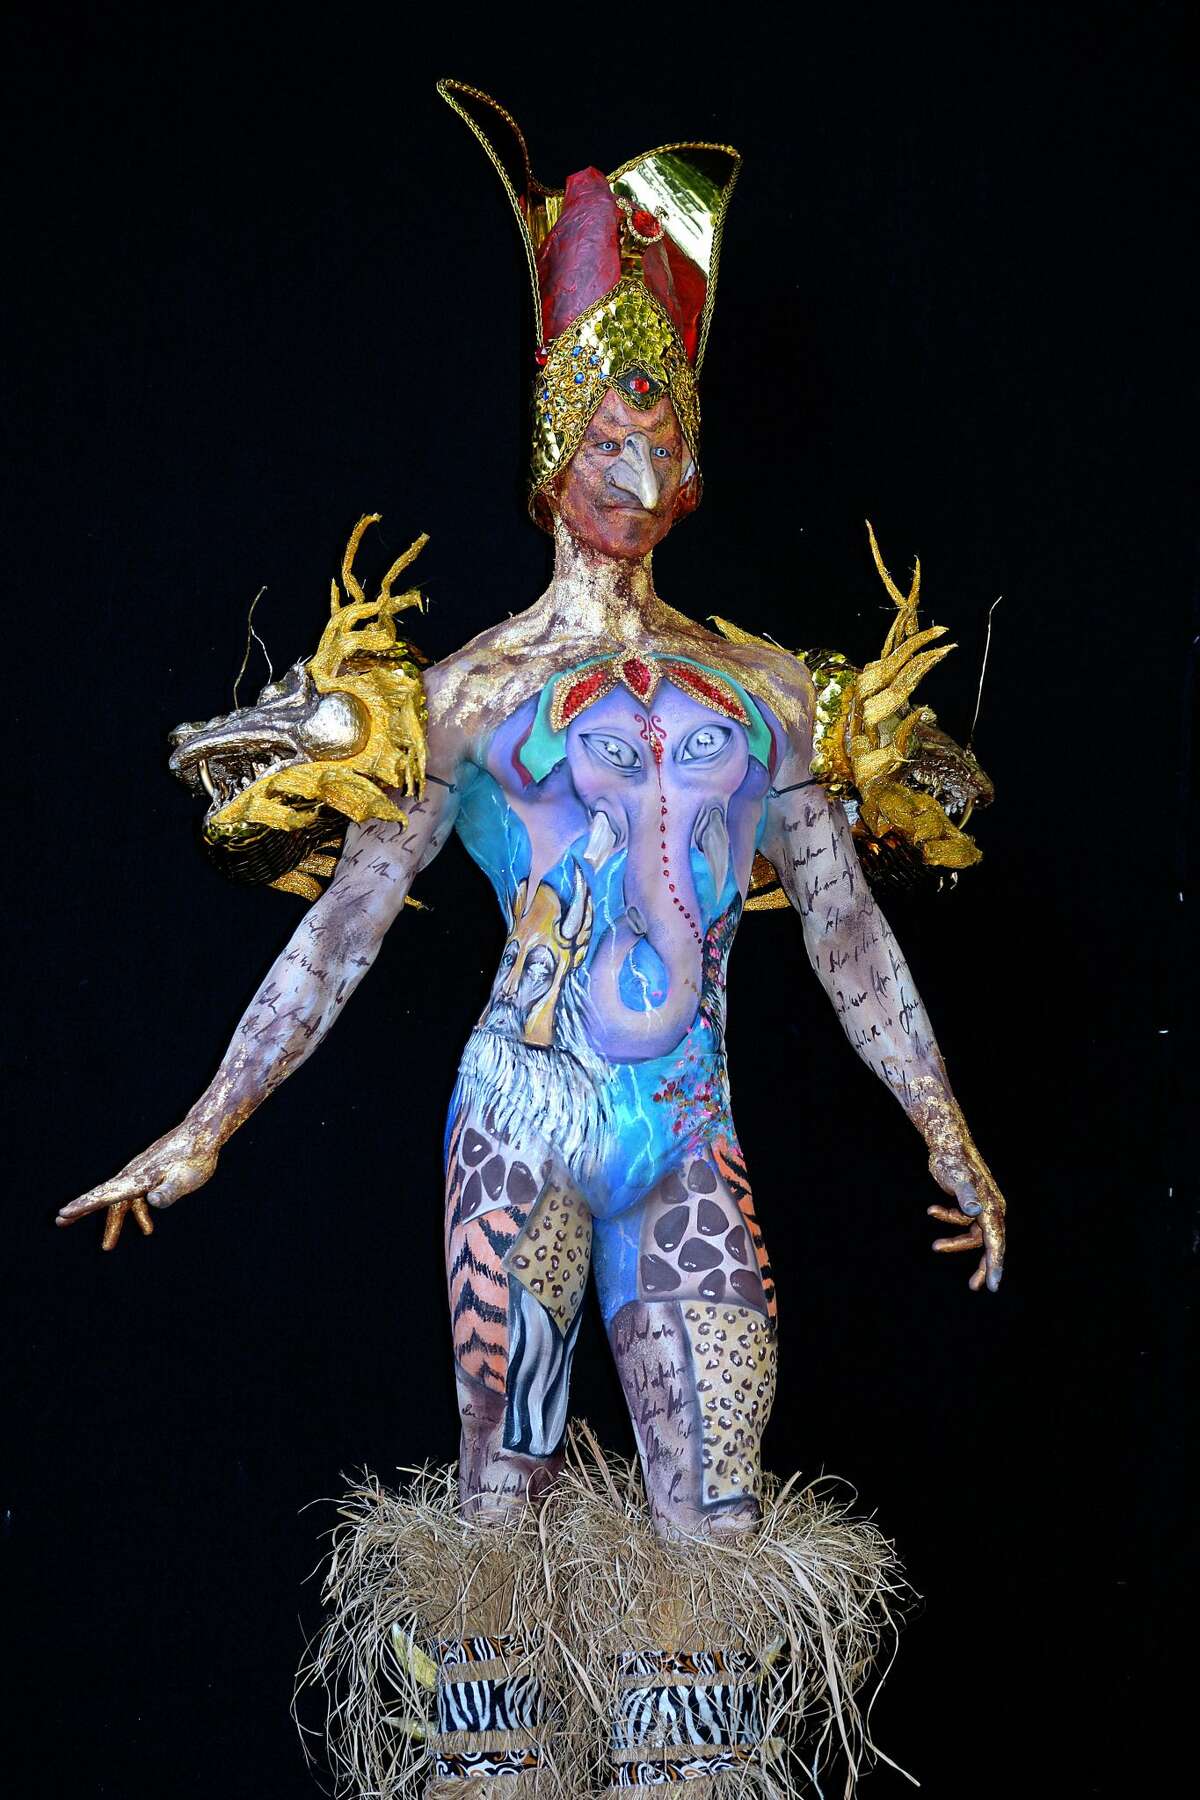 Photos World Bodypainting Festival Gets Creative Naked In Austria